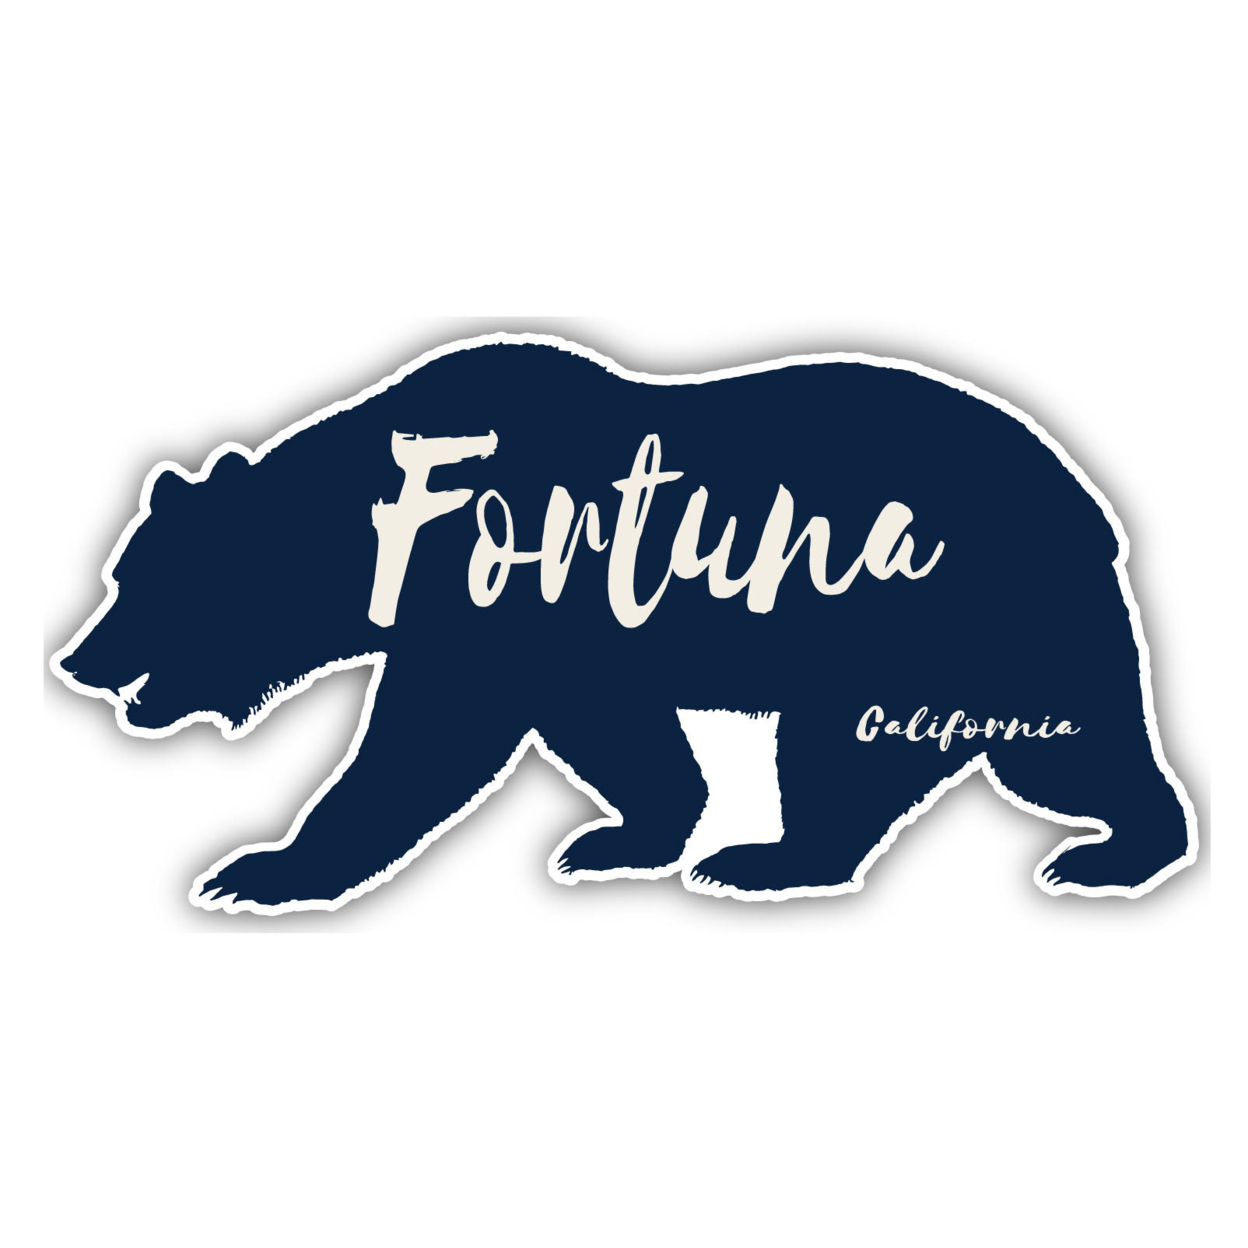 Fortuna California Souvenir Decorative Stickers (Choose Theme And Size) - 4-Pack, 12-Inch, Camp Life